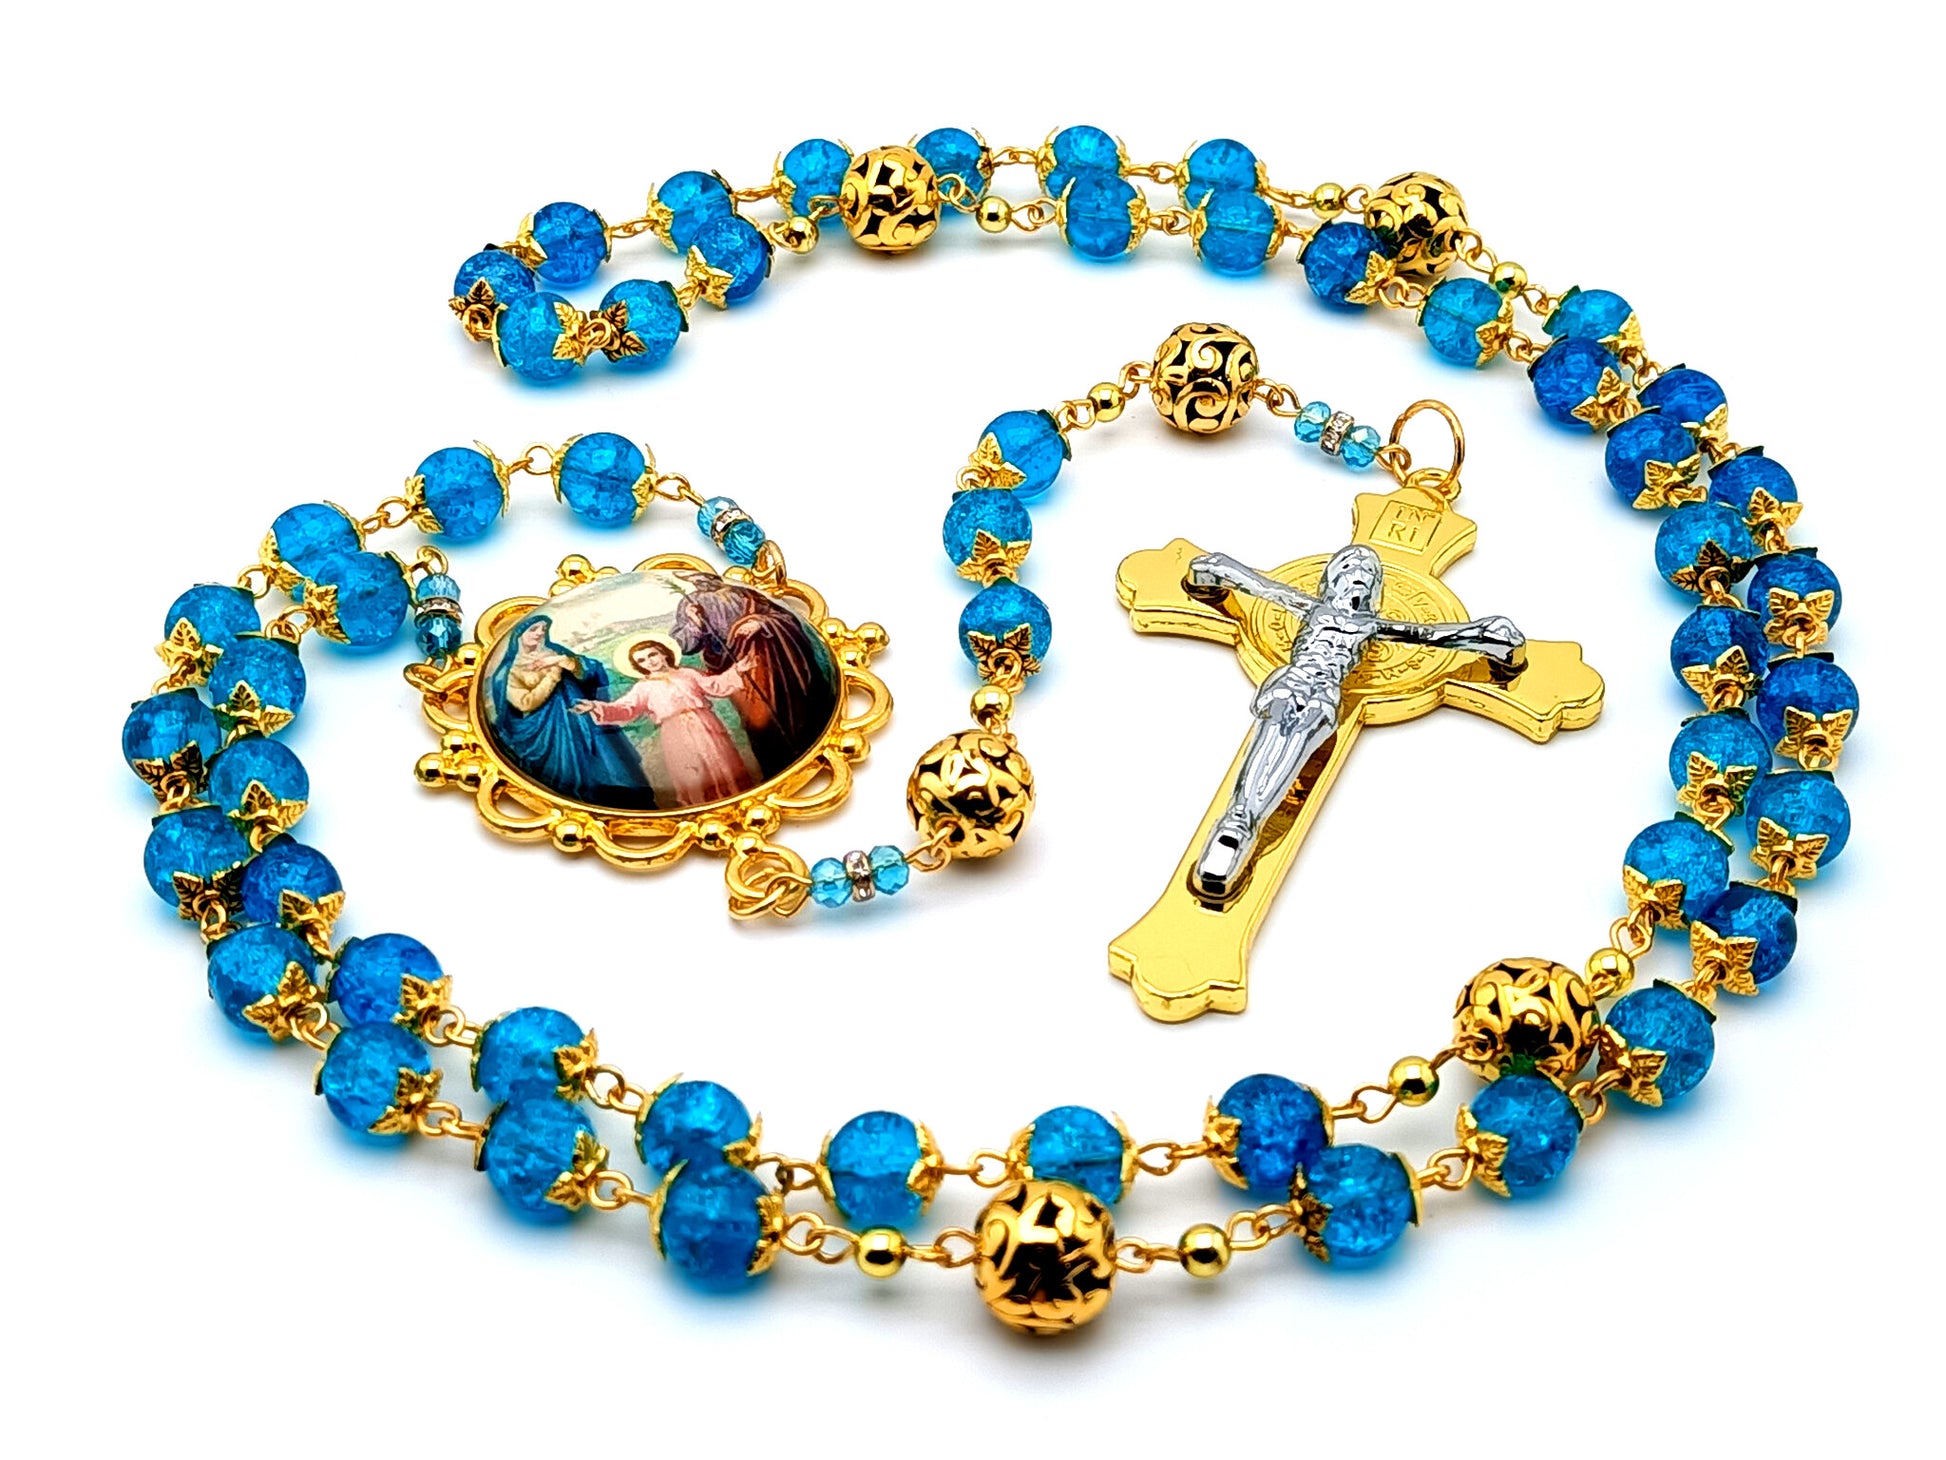 Holy Family unique rosary beads with blue glass and gold beads and large gold plated Saint Benedict crucifix.